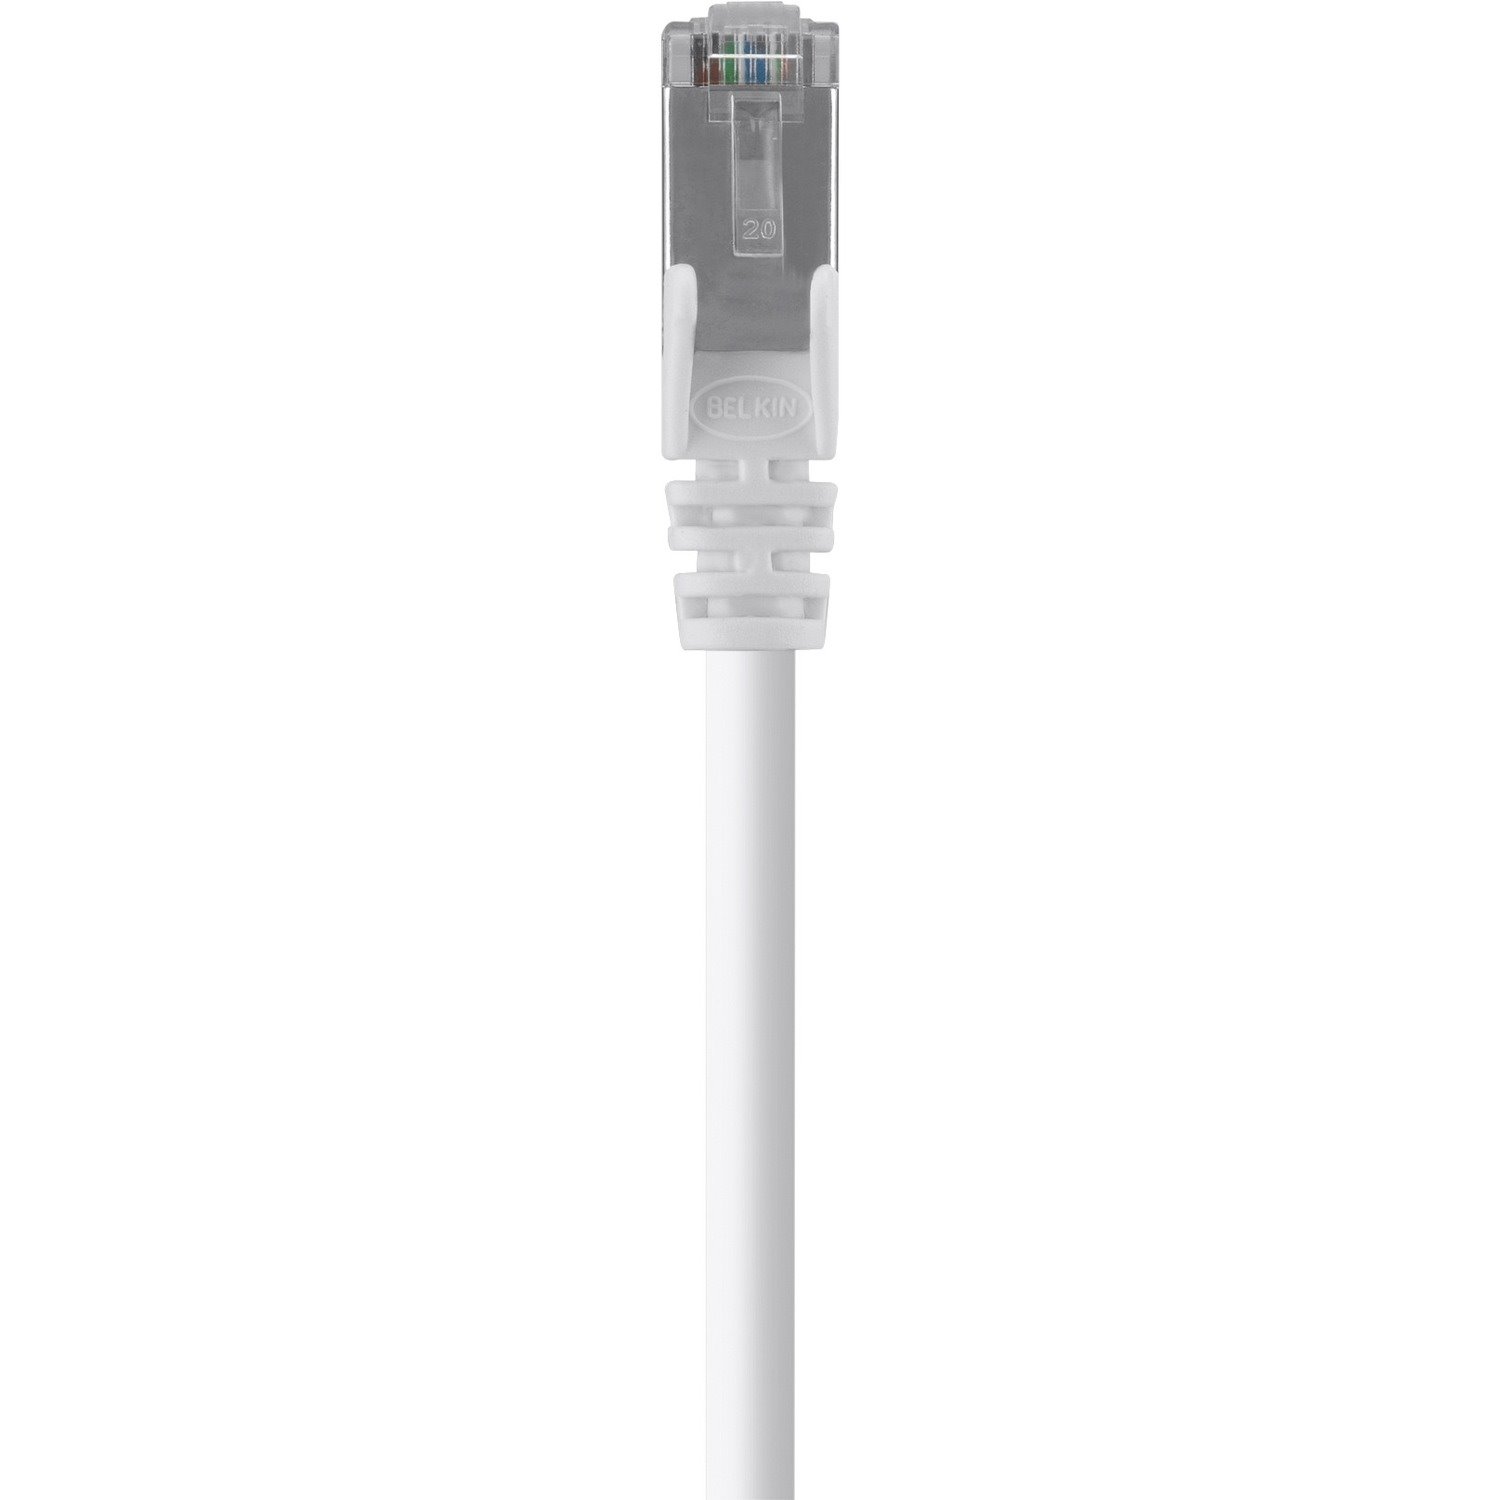 Belkin RJ45 Category 5e Patch Cable